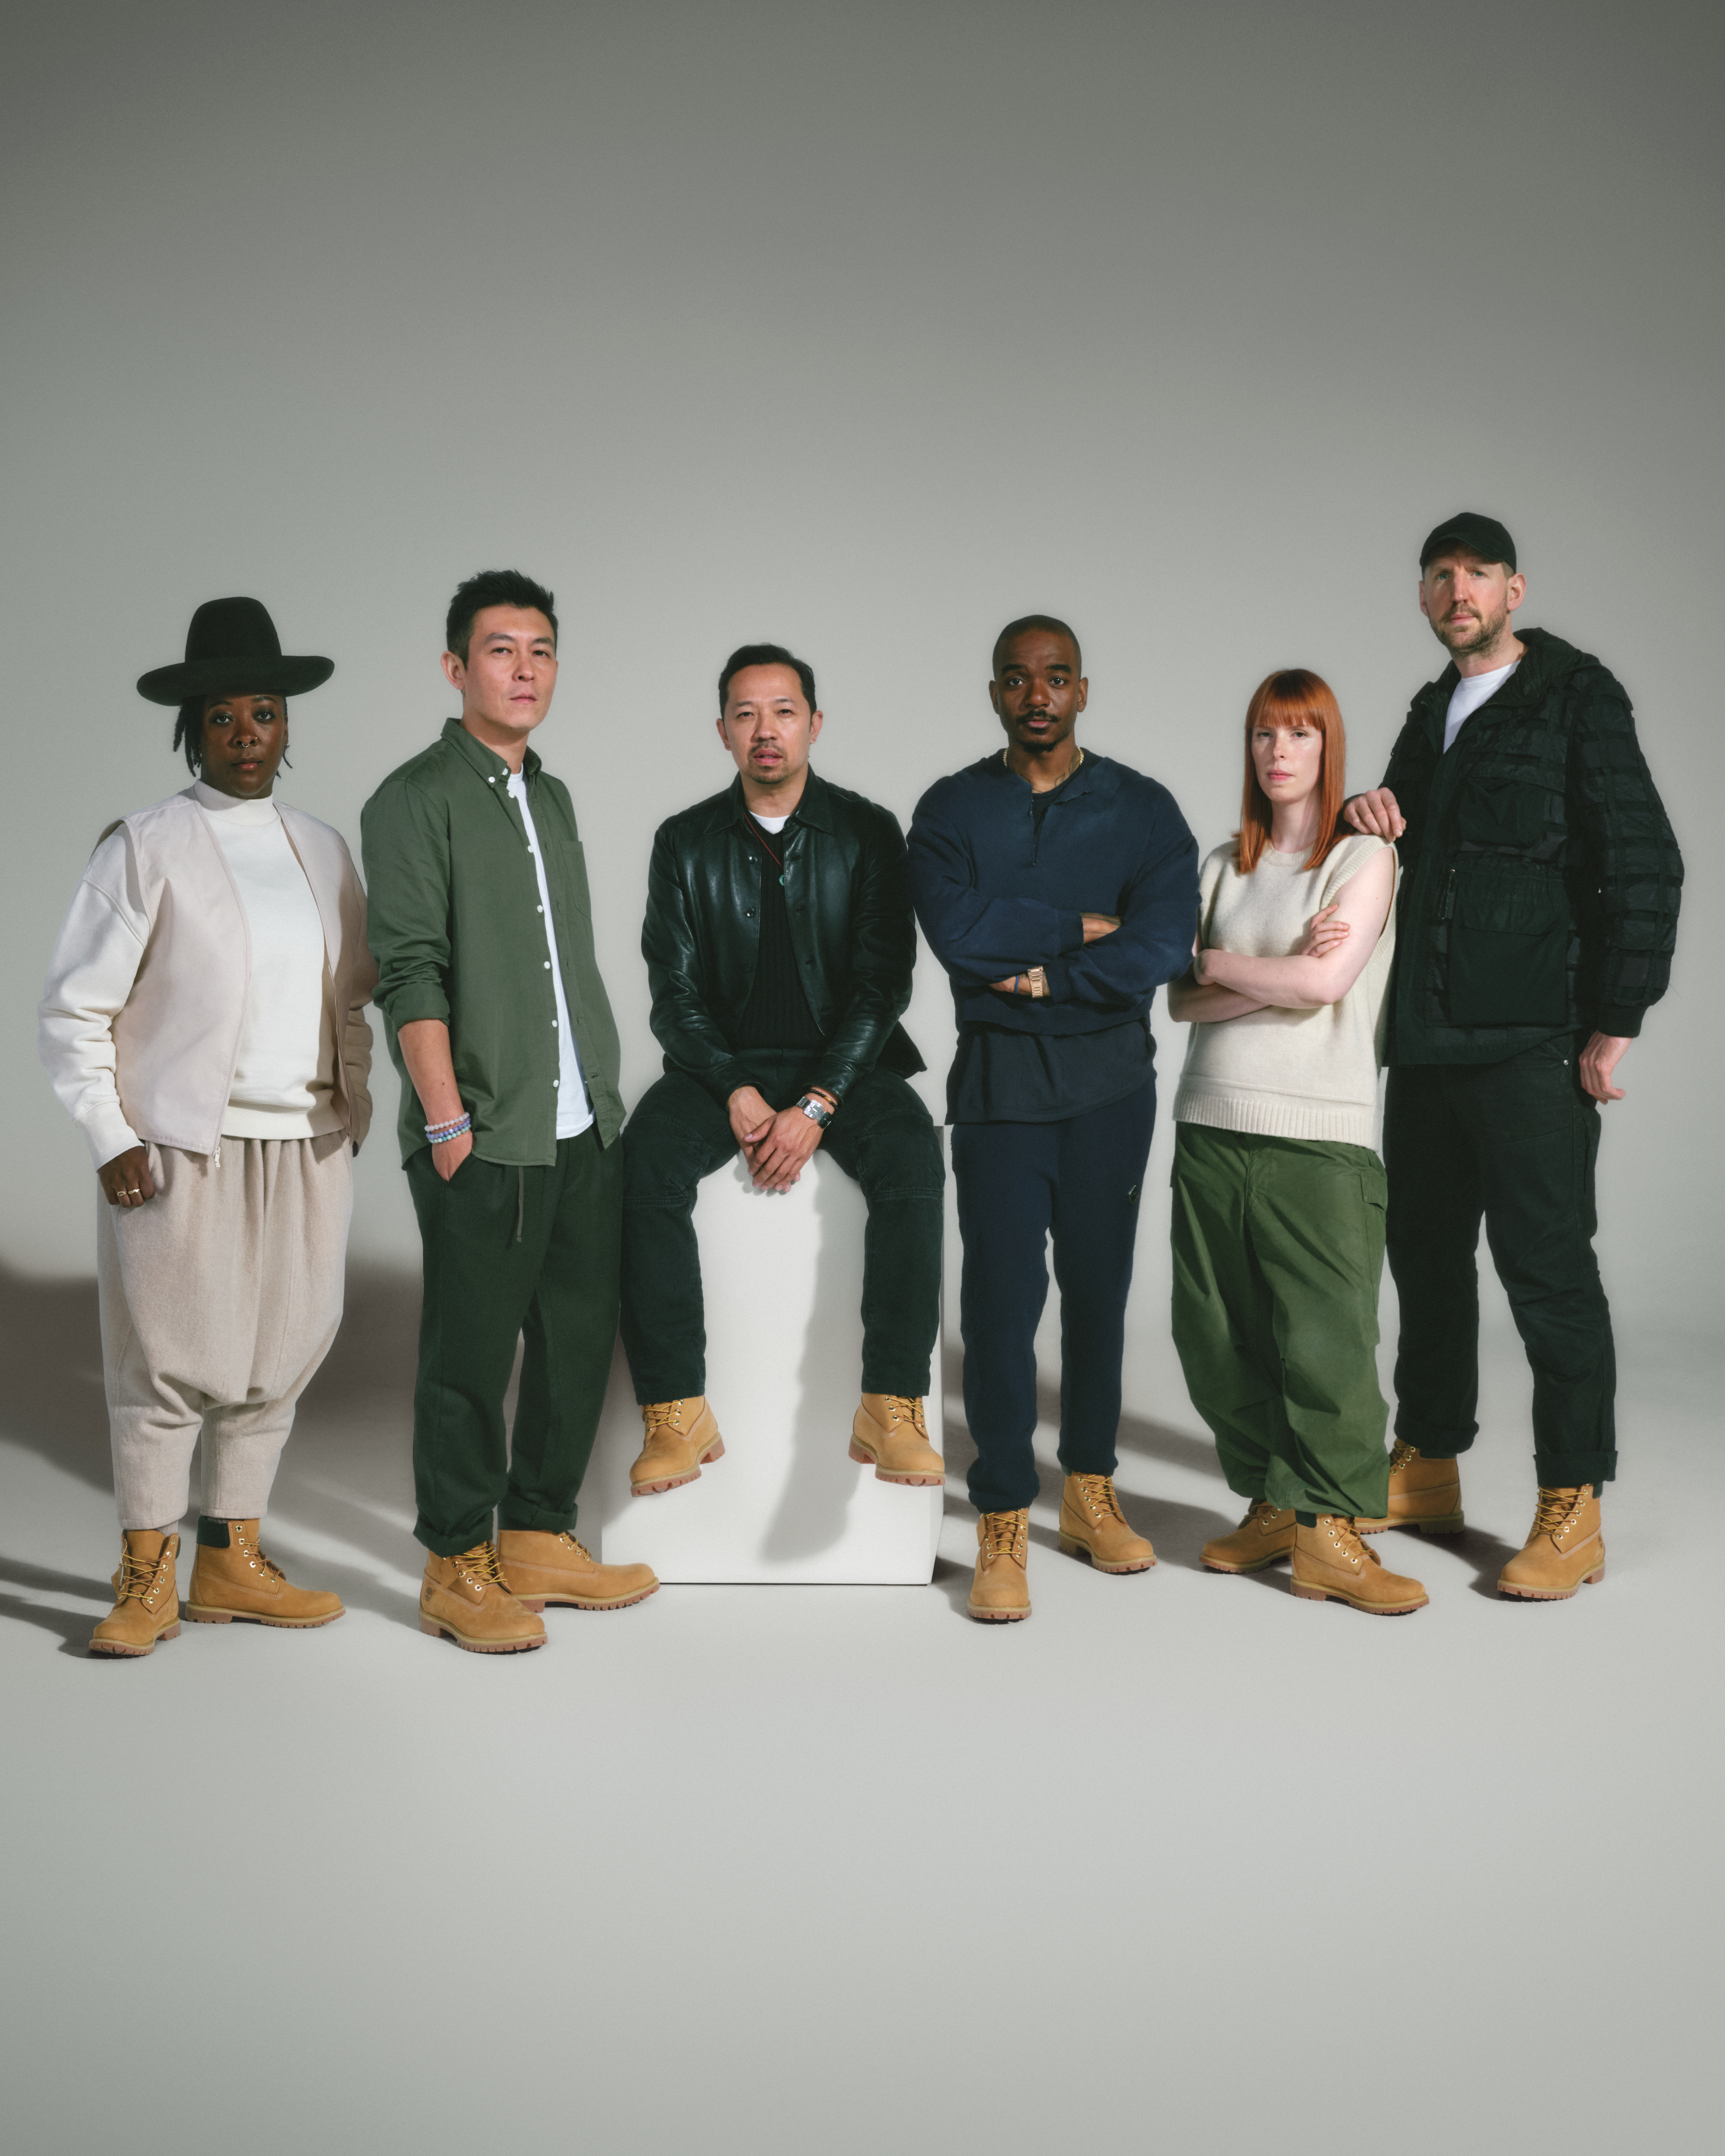 Timberland Marks Business Timberland® With Wire | Five Launch Boot Original of Decades Future73 the of